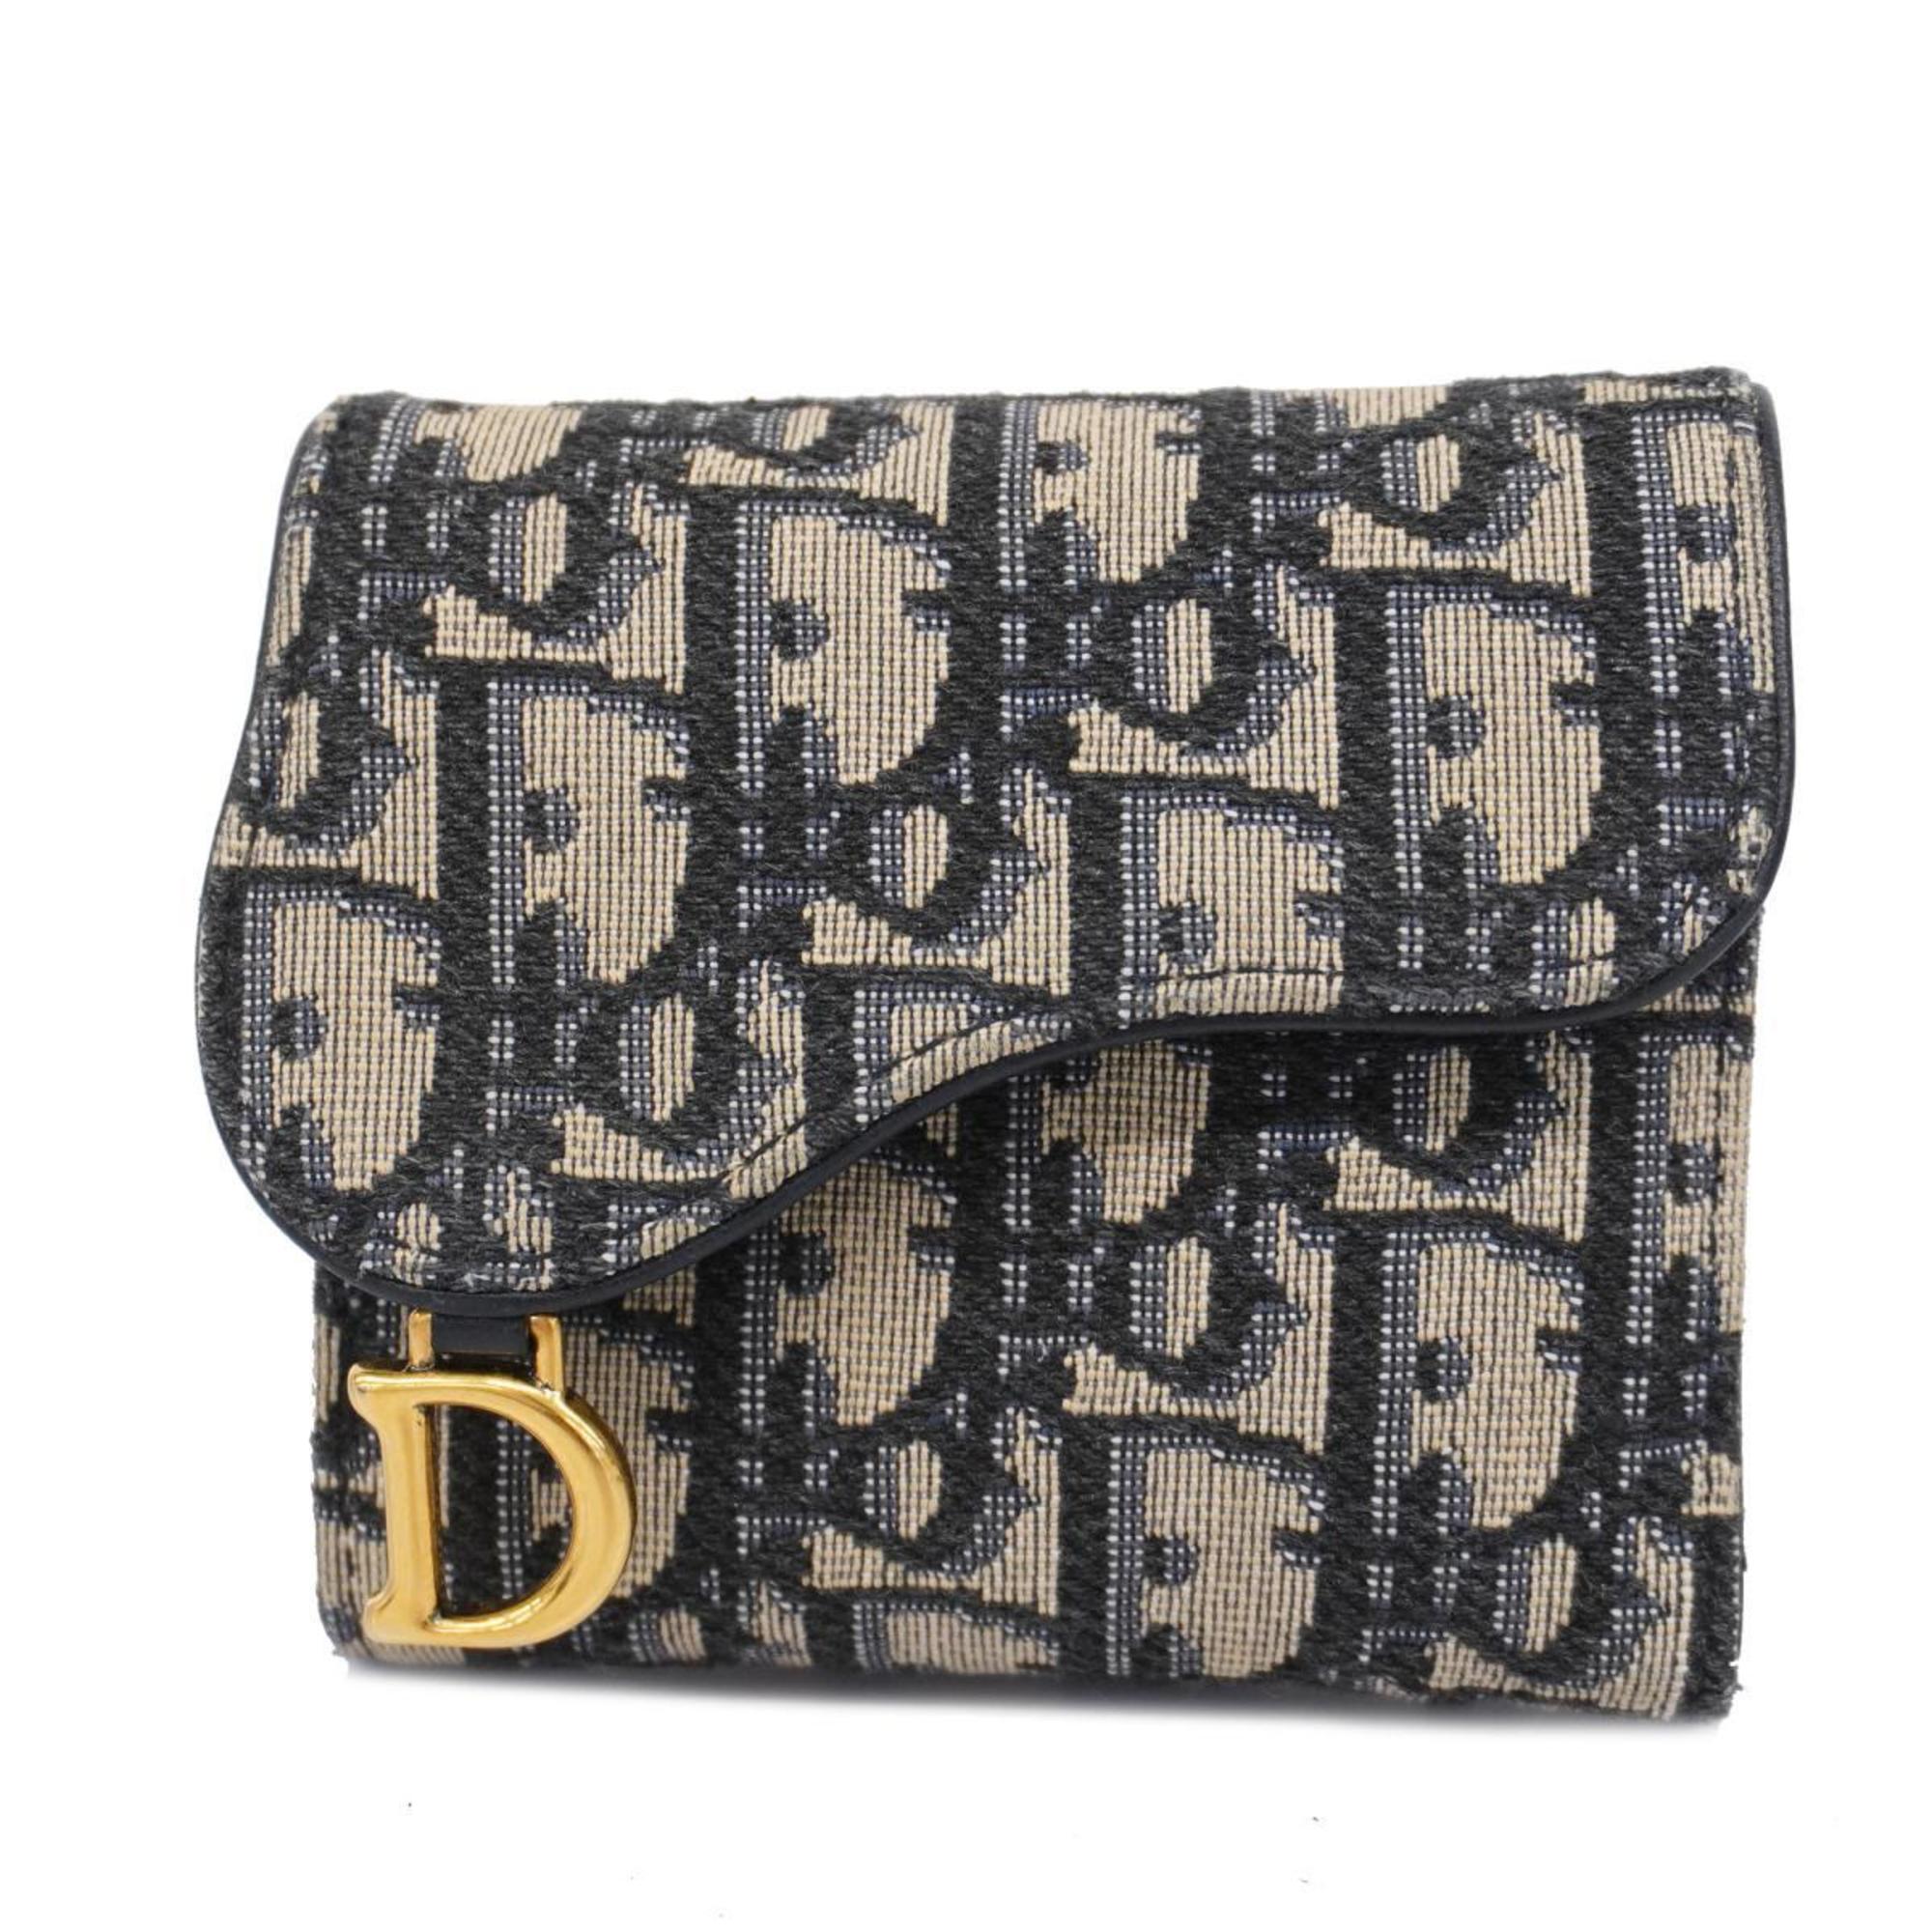 Christian Dior Tri-fold Wallet Trotter Canvas Navy Women's